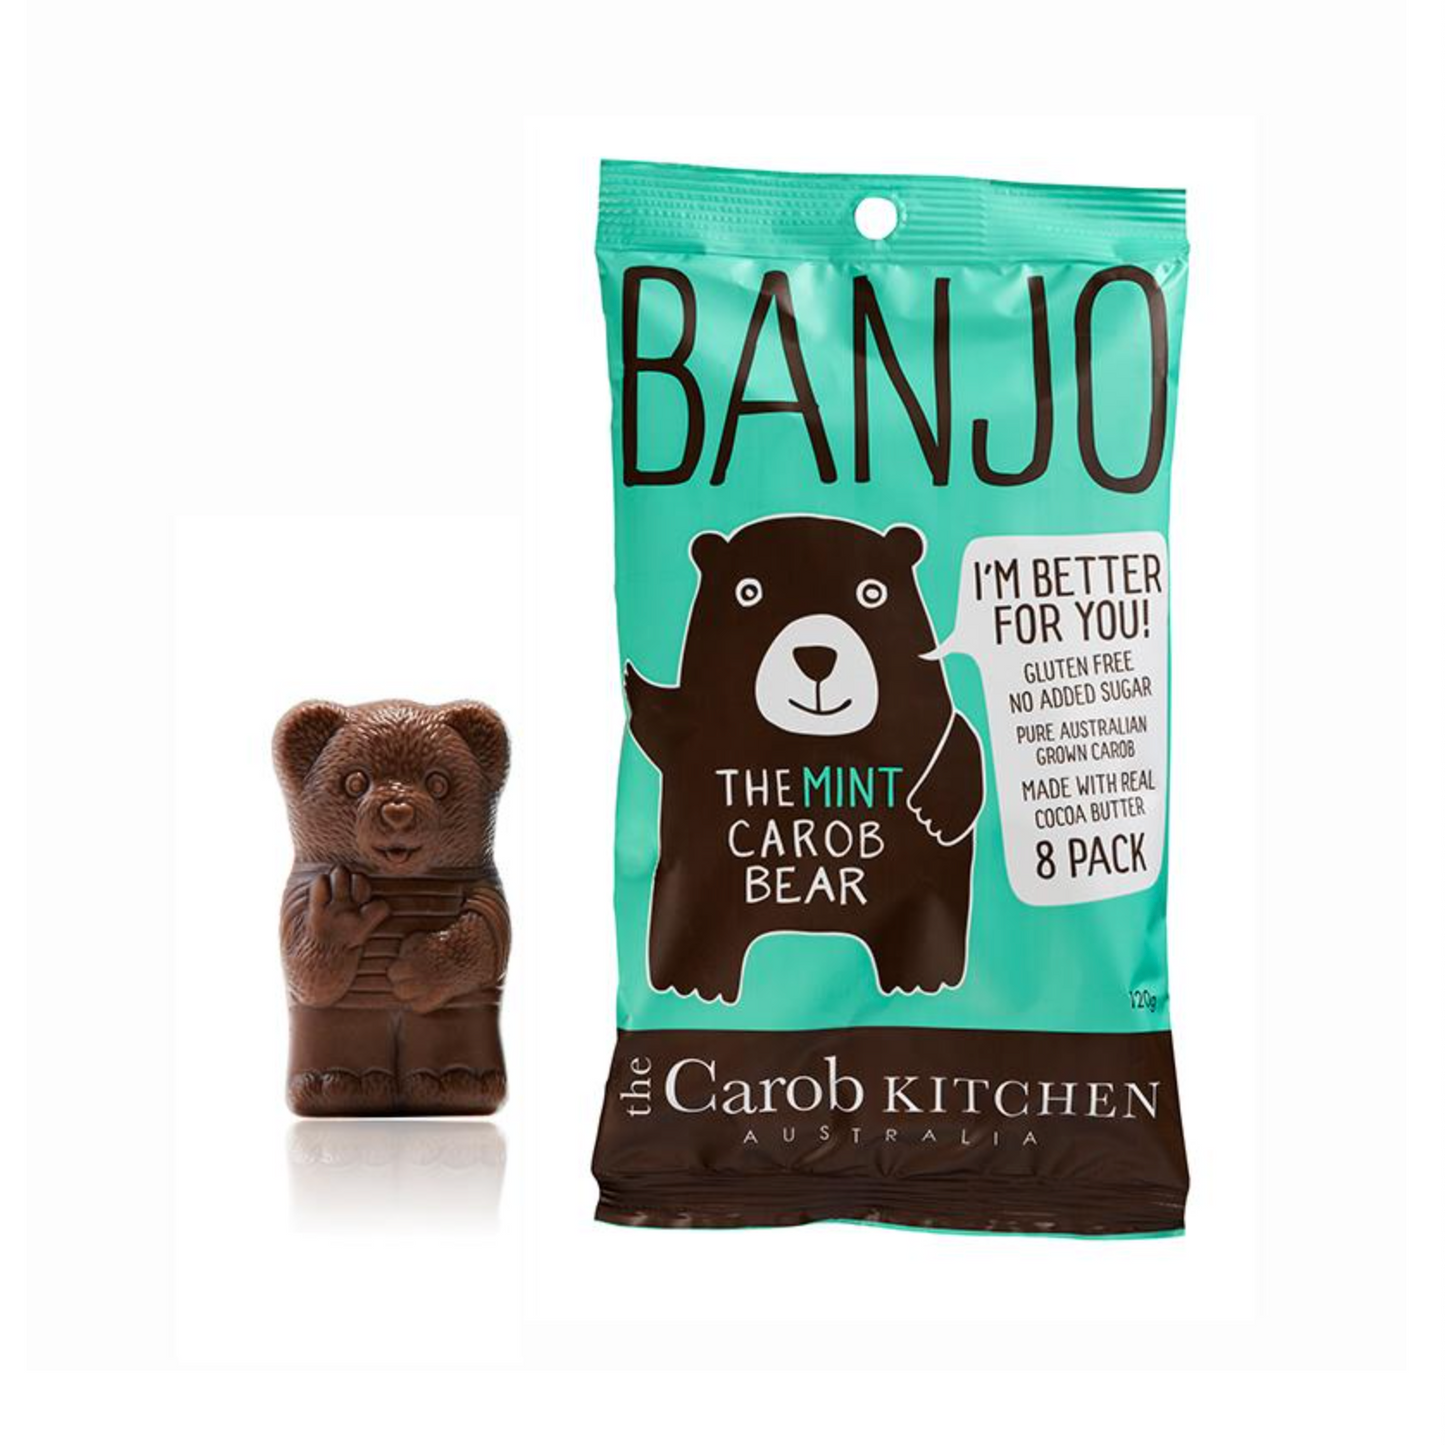 The Carob Kitchen Banjo Bear 15g Or 8 Pack, Mint Flavour